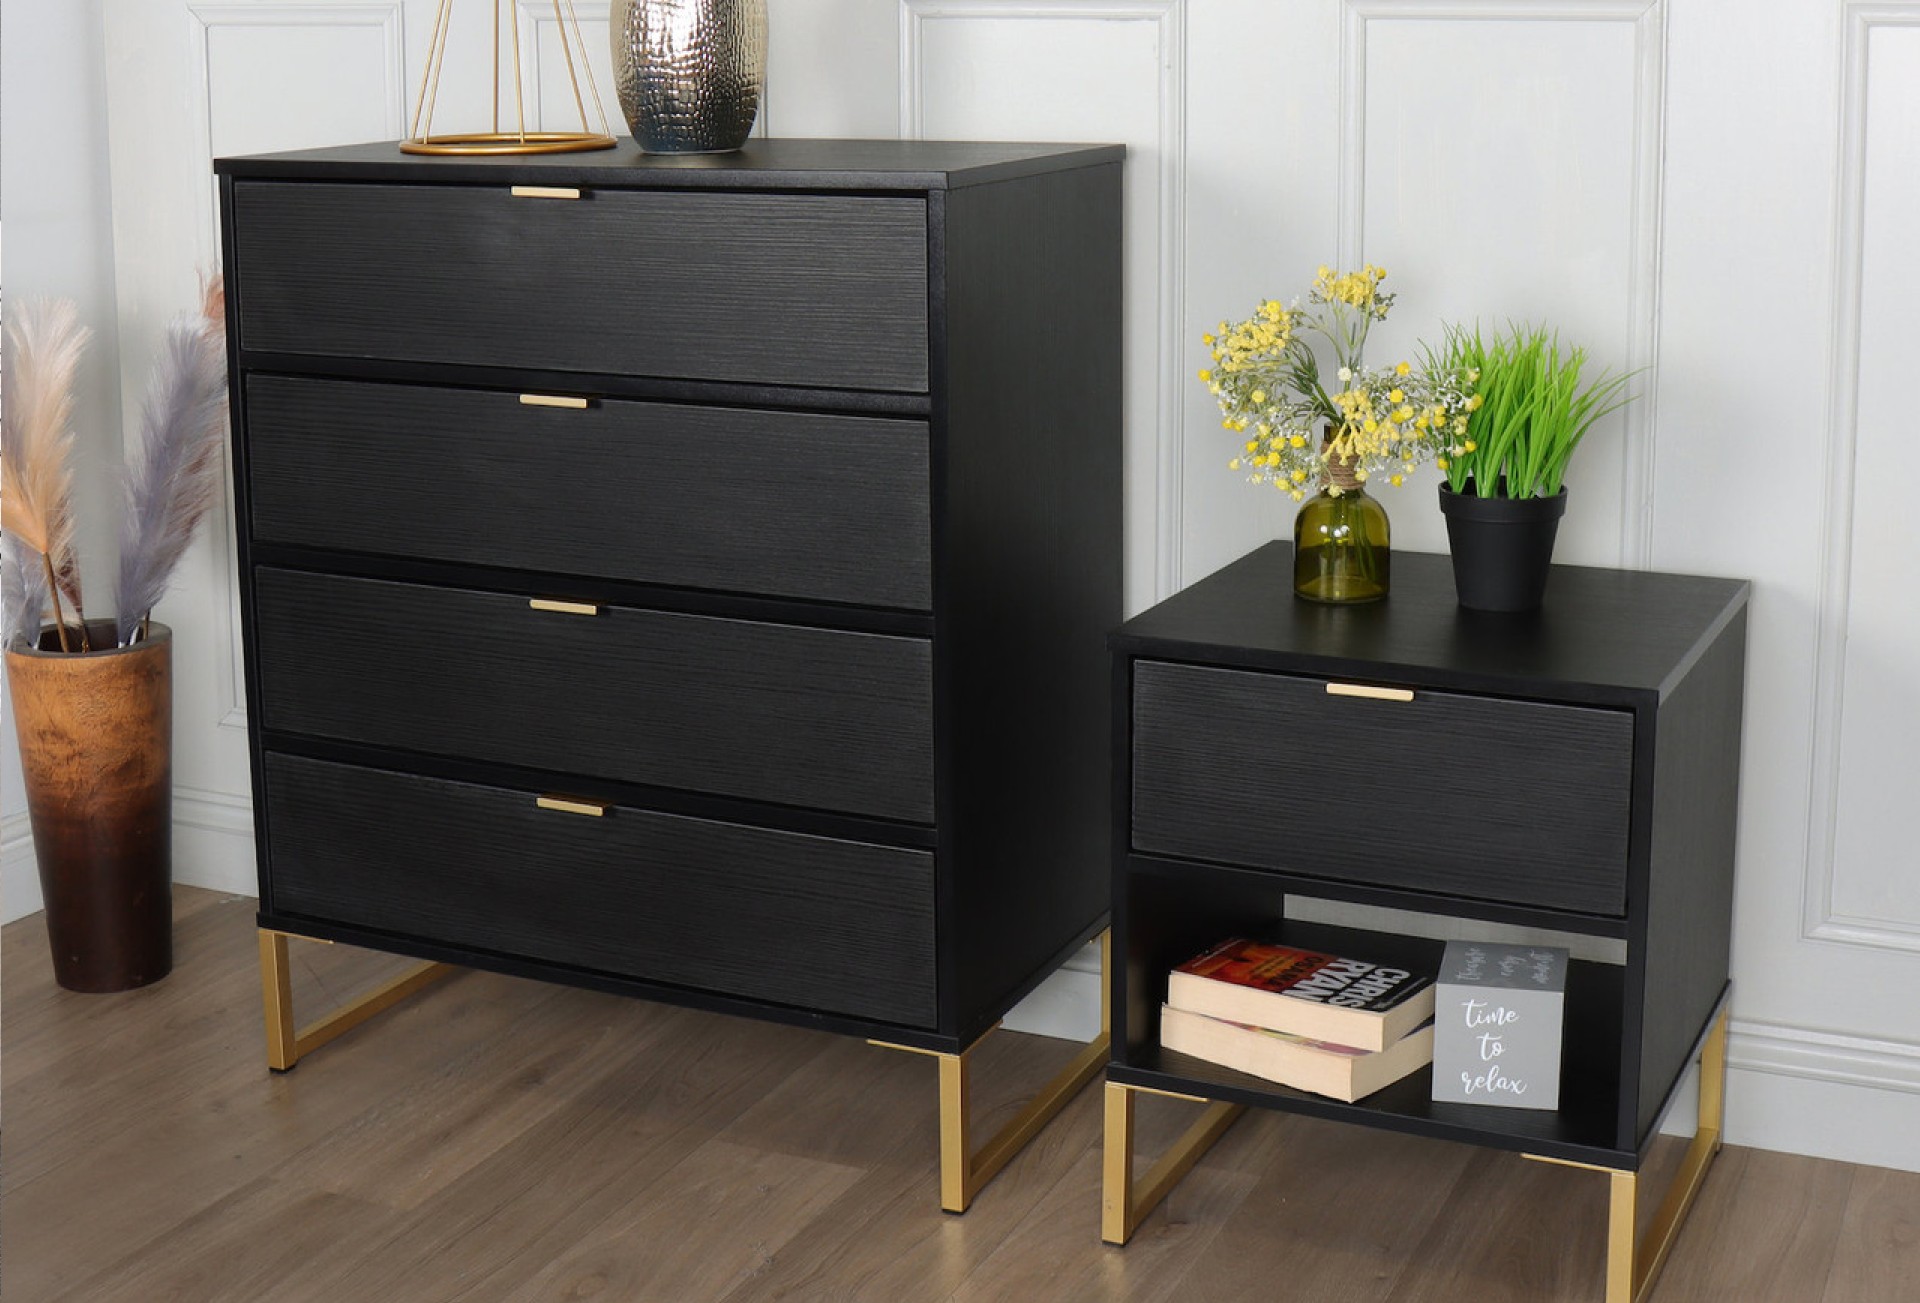 Diego bedroom chest of drawers and bedside table in black